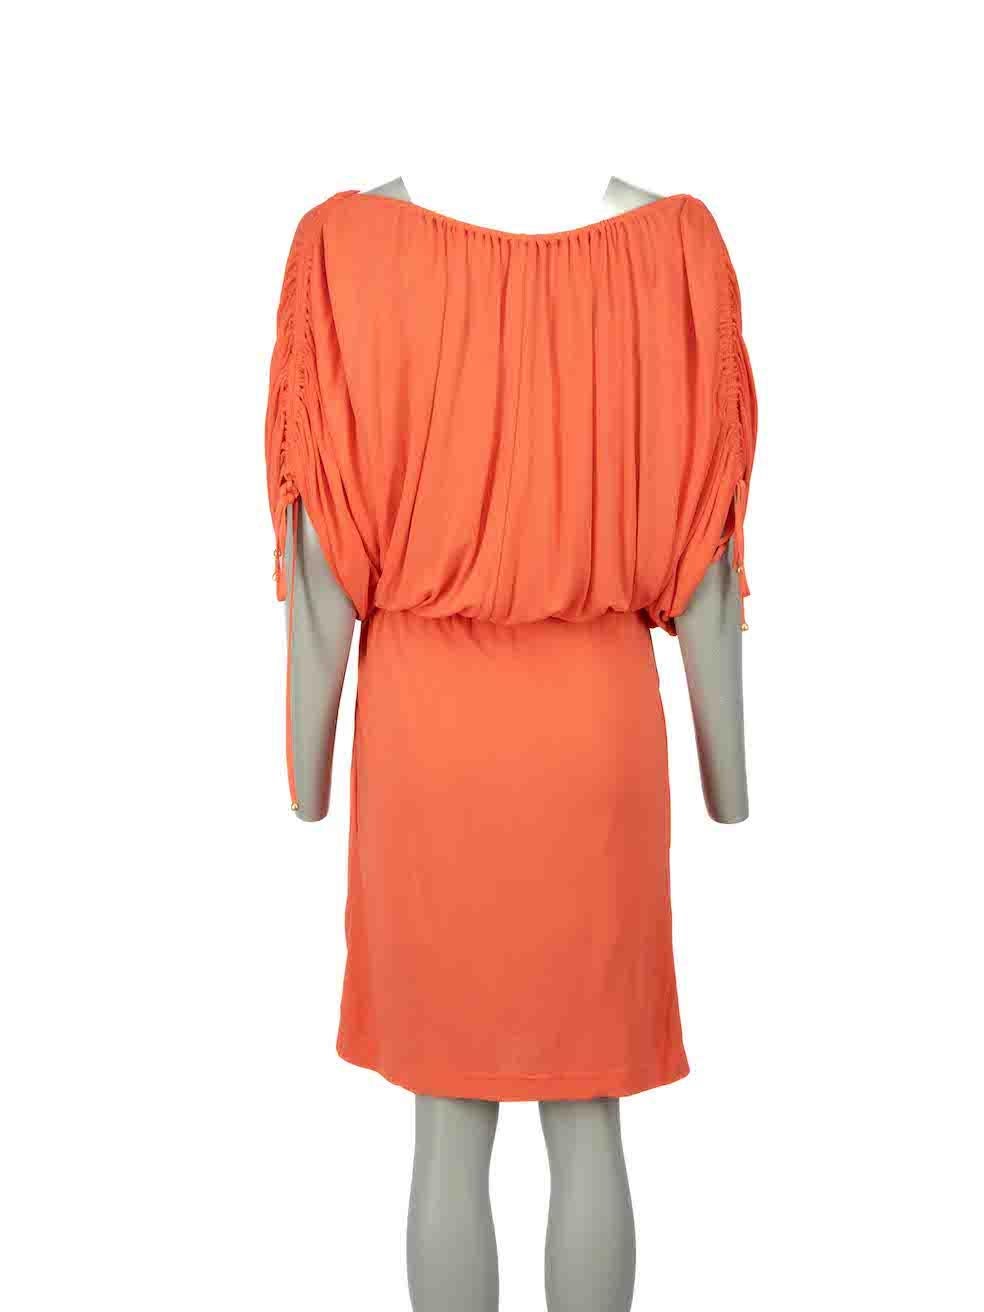 Women's Temperley London Orange Ruched Sleeves Mini Dress Size M For Sale